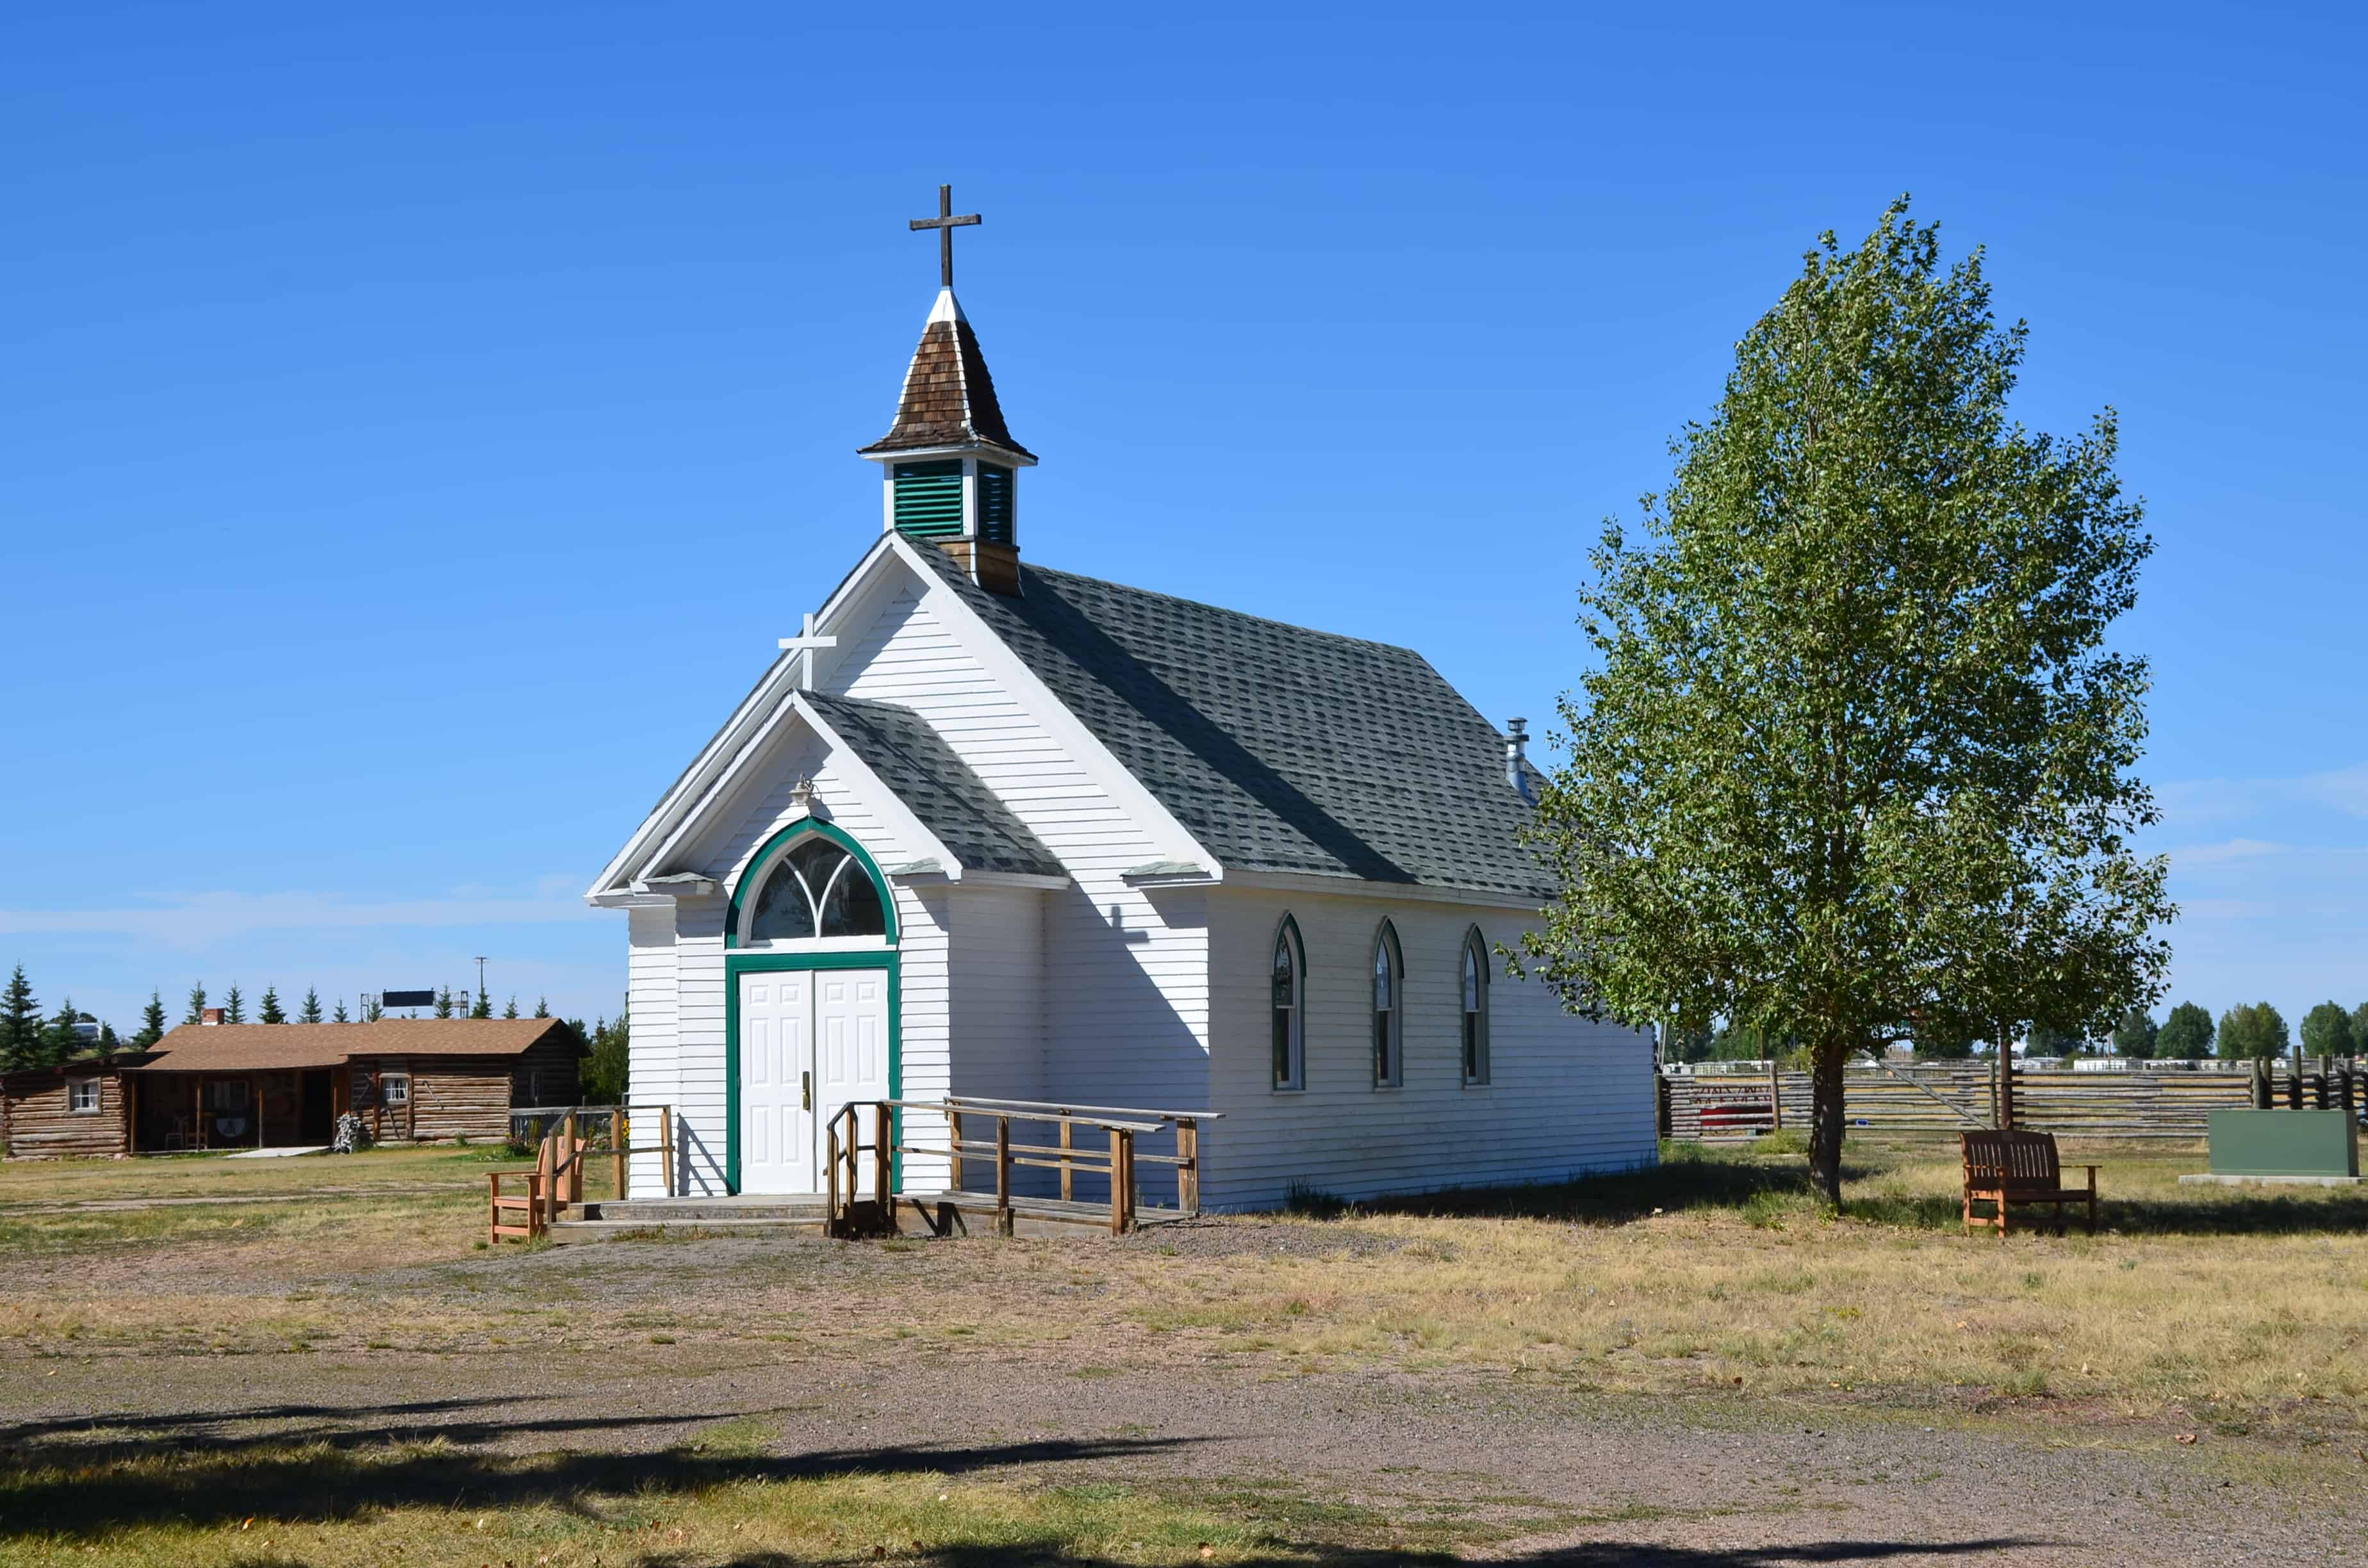 St. Mary’s of the Plains church at the pioneer village at Wyoming Territorial Prison State Historic Site in Laramie